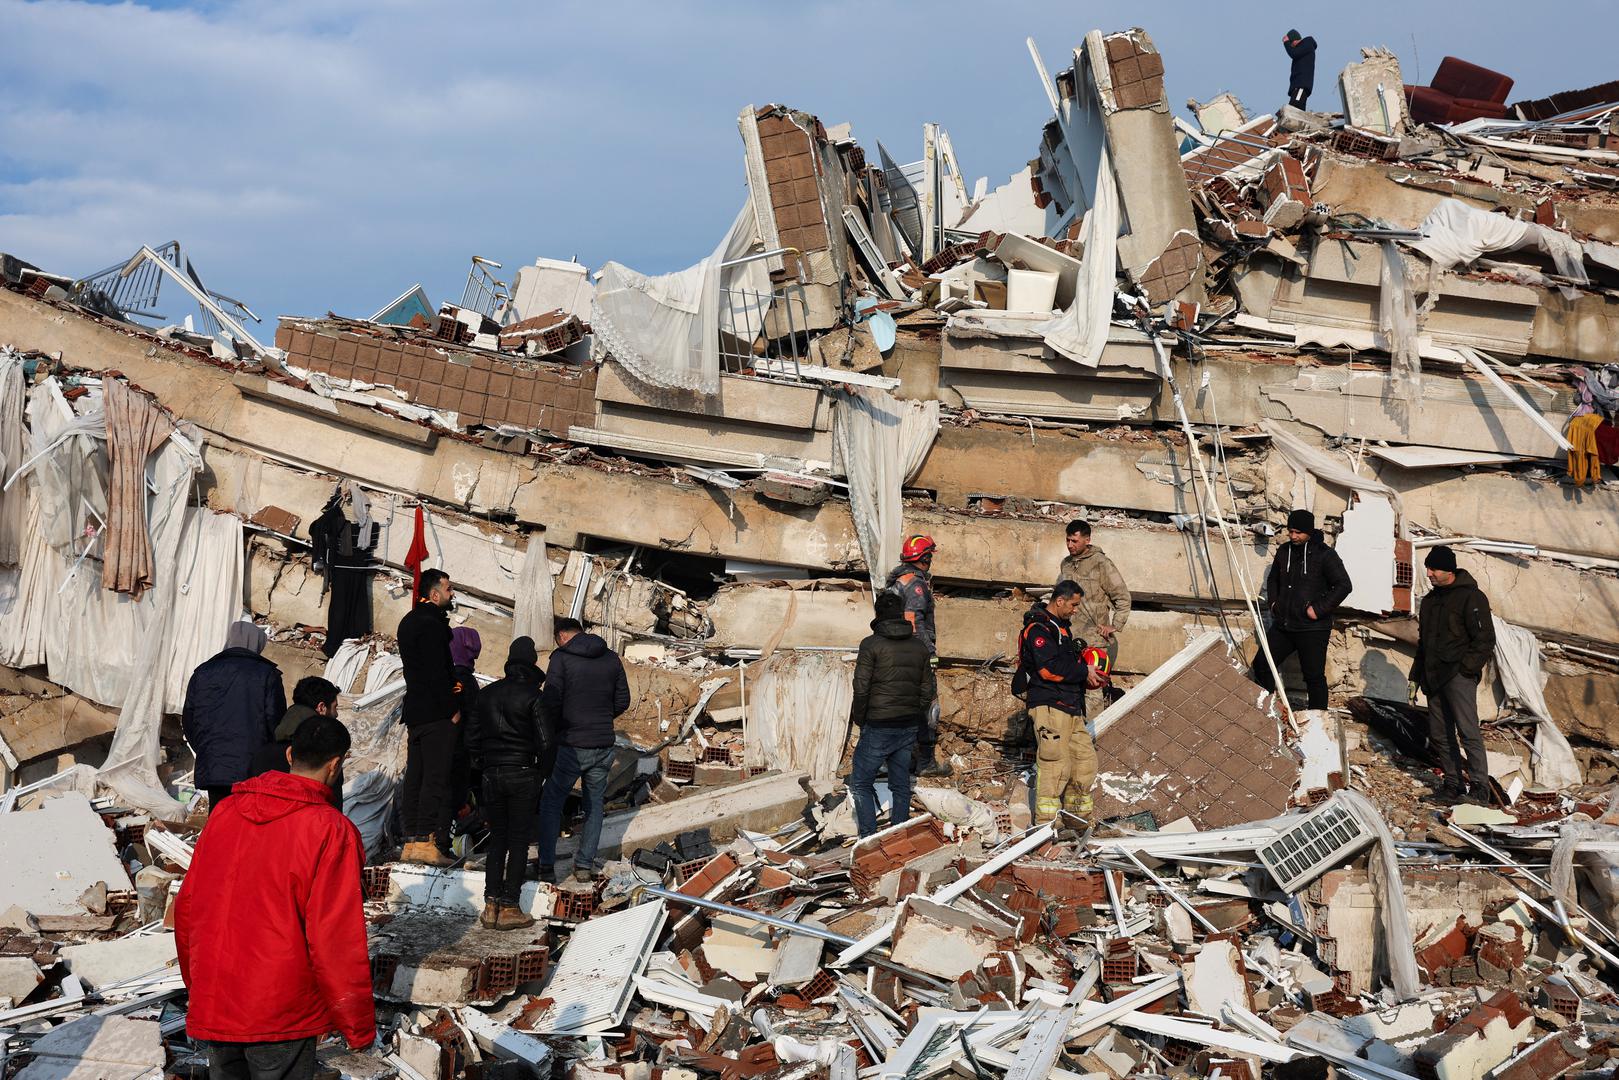 People look at the destruction as rescuers search for survivors in the rubble following an earthquake in Hatay, Turkey, February 7, 2023. REUTERS/Umit Bektas Photo: UMIT BEKTAS/REUTERS